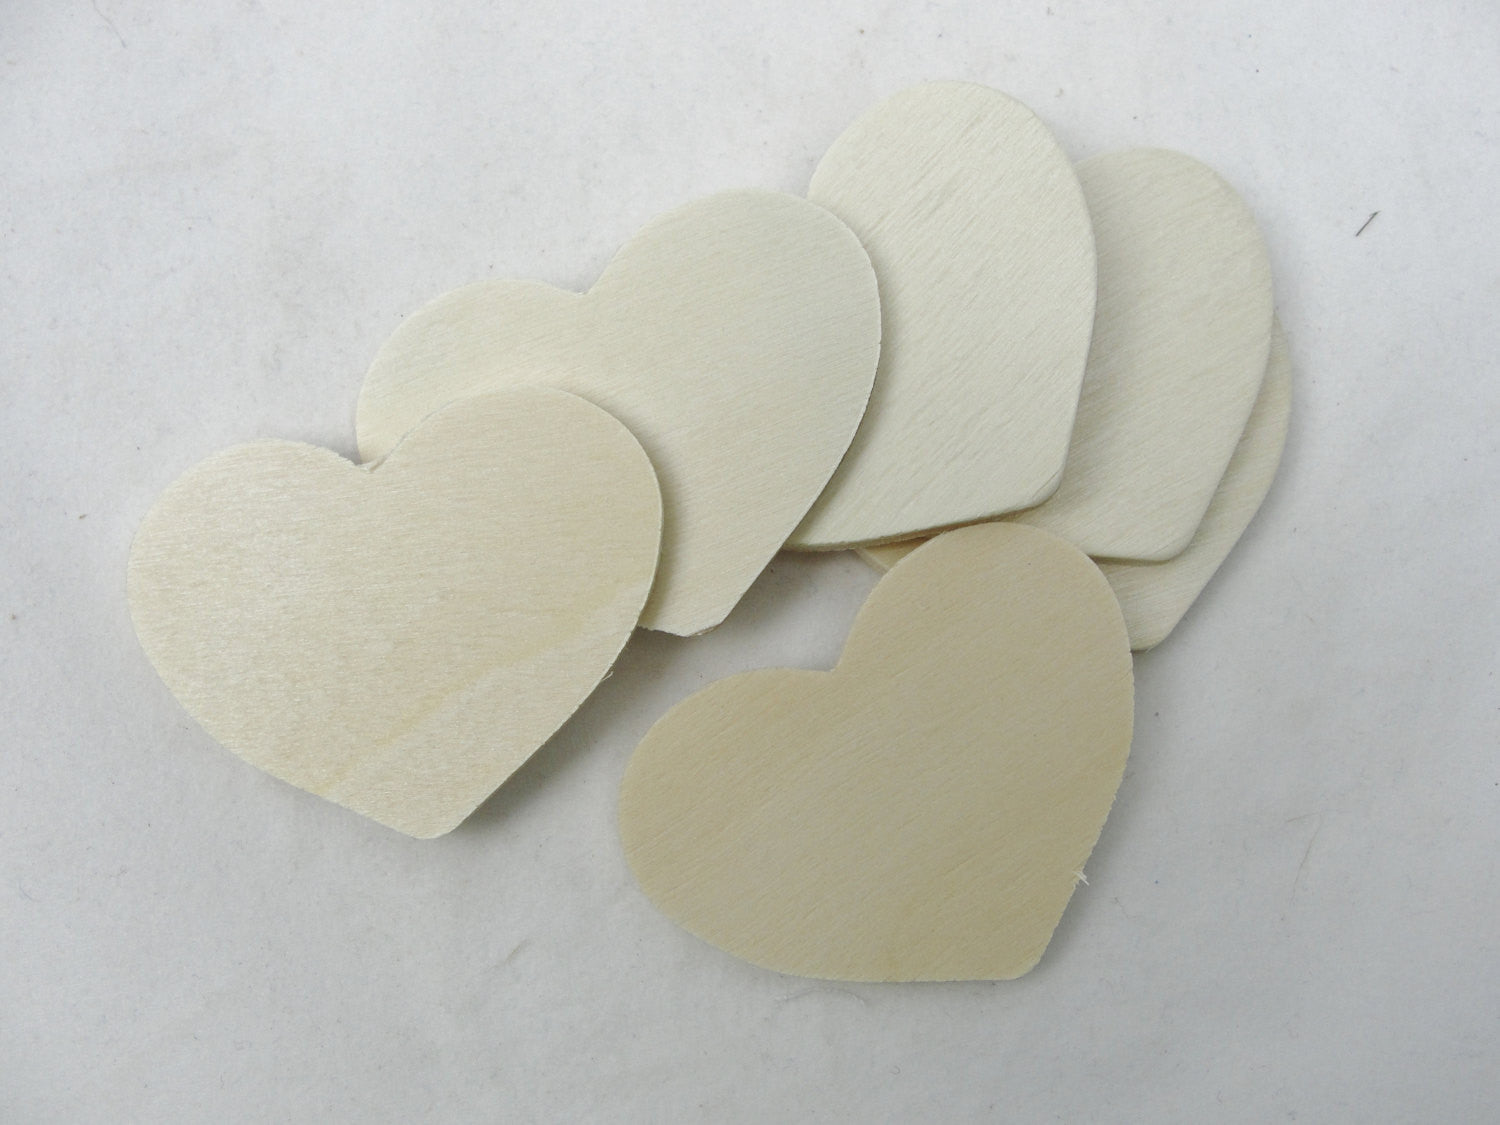 6 wooden country hearts 2" wide 1 1/2" tall 1/8" thick unfinished - Wood parts - Craft Supply House